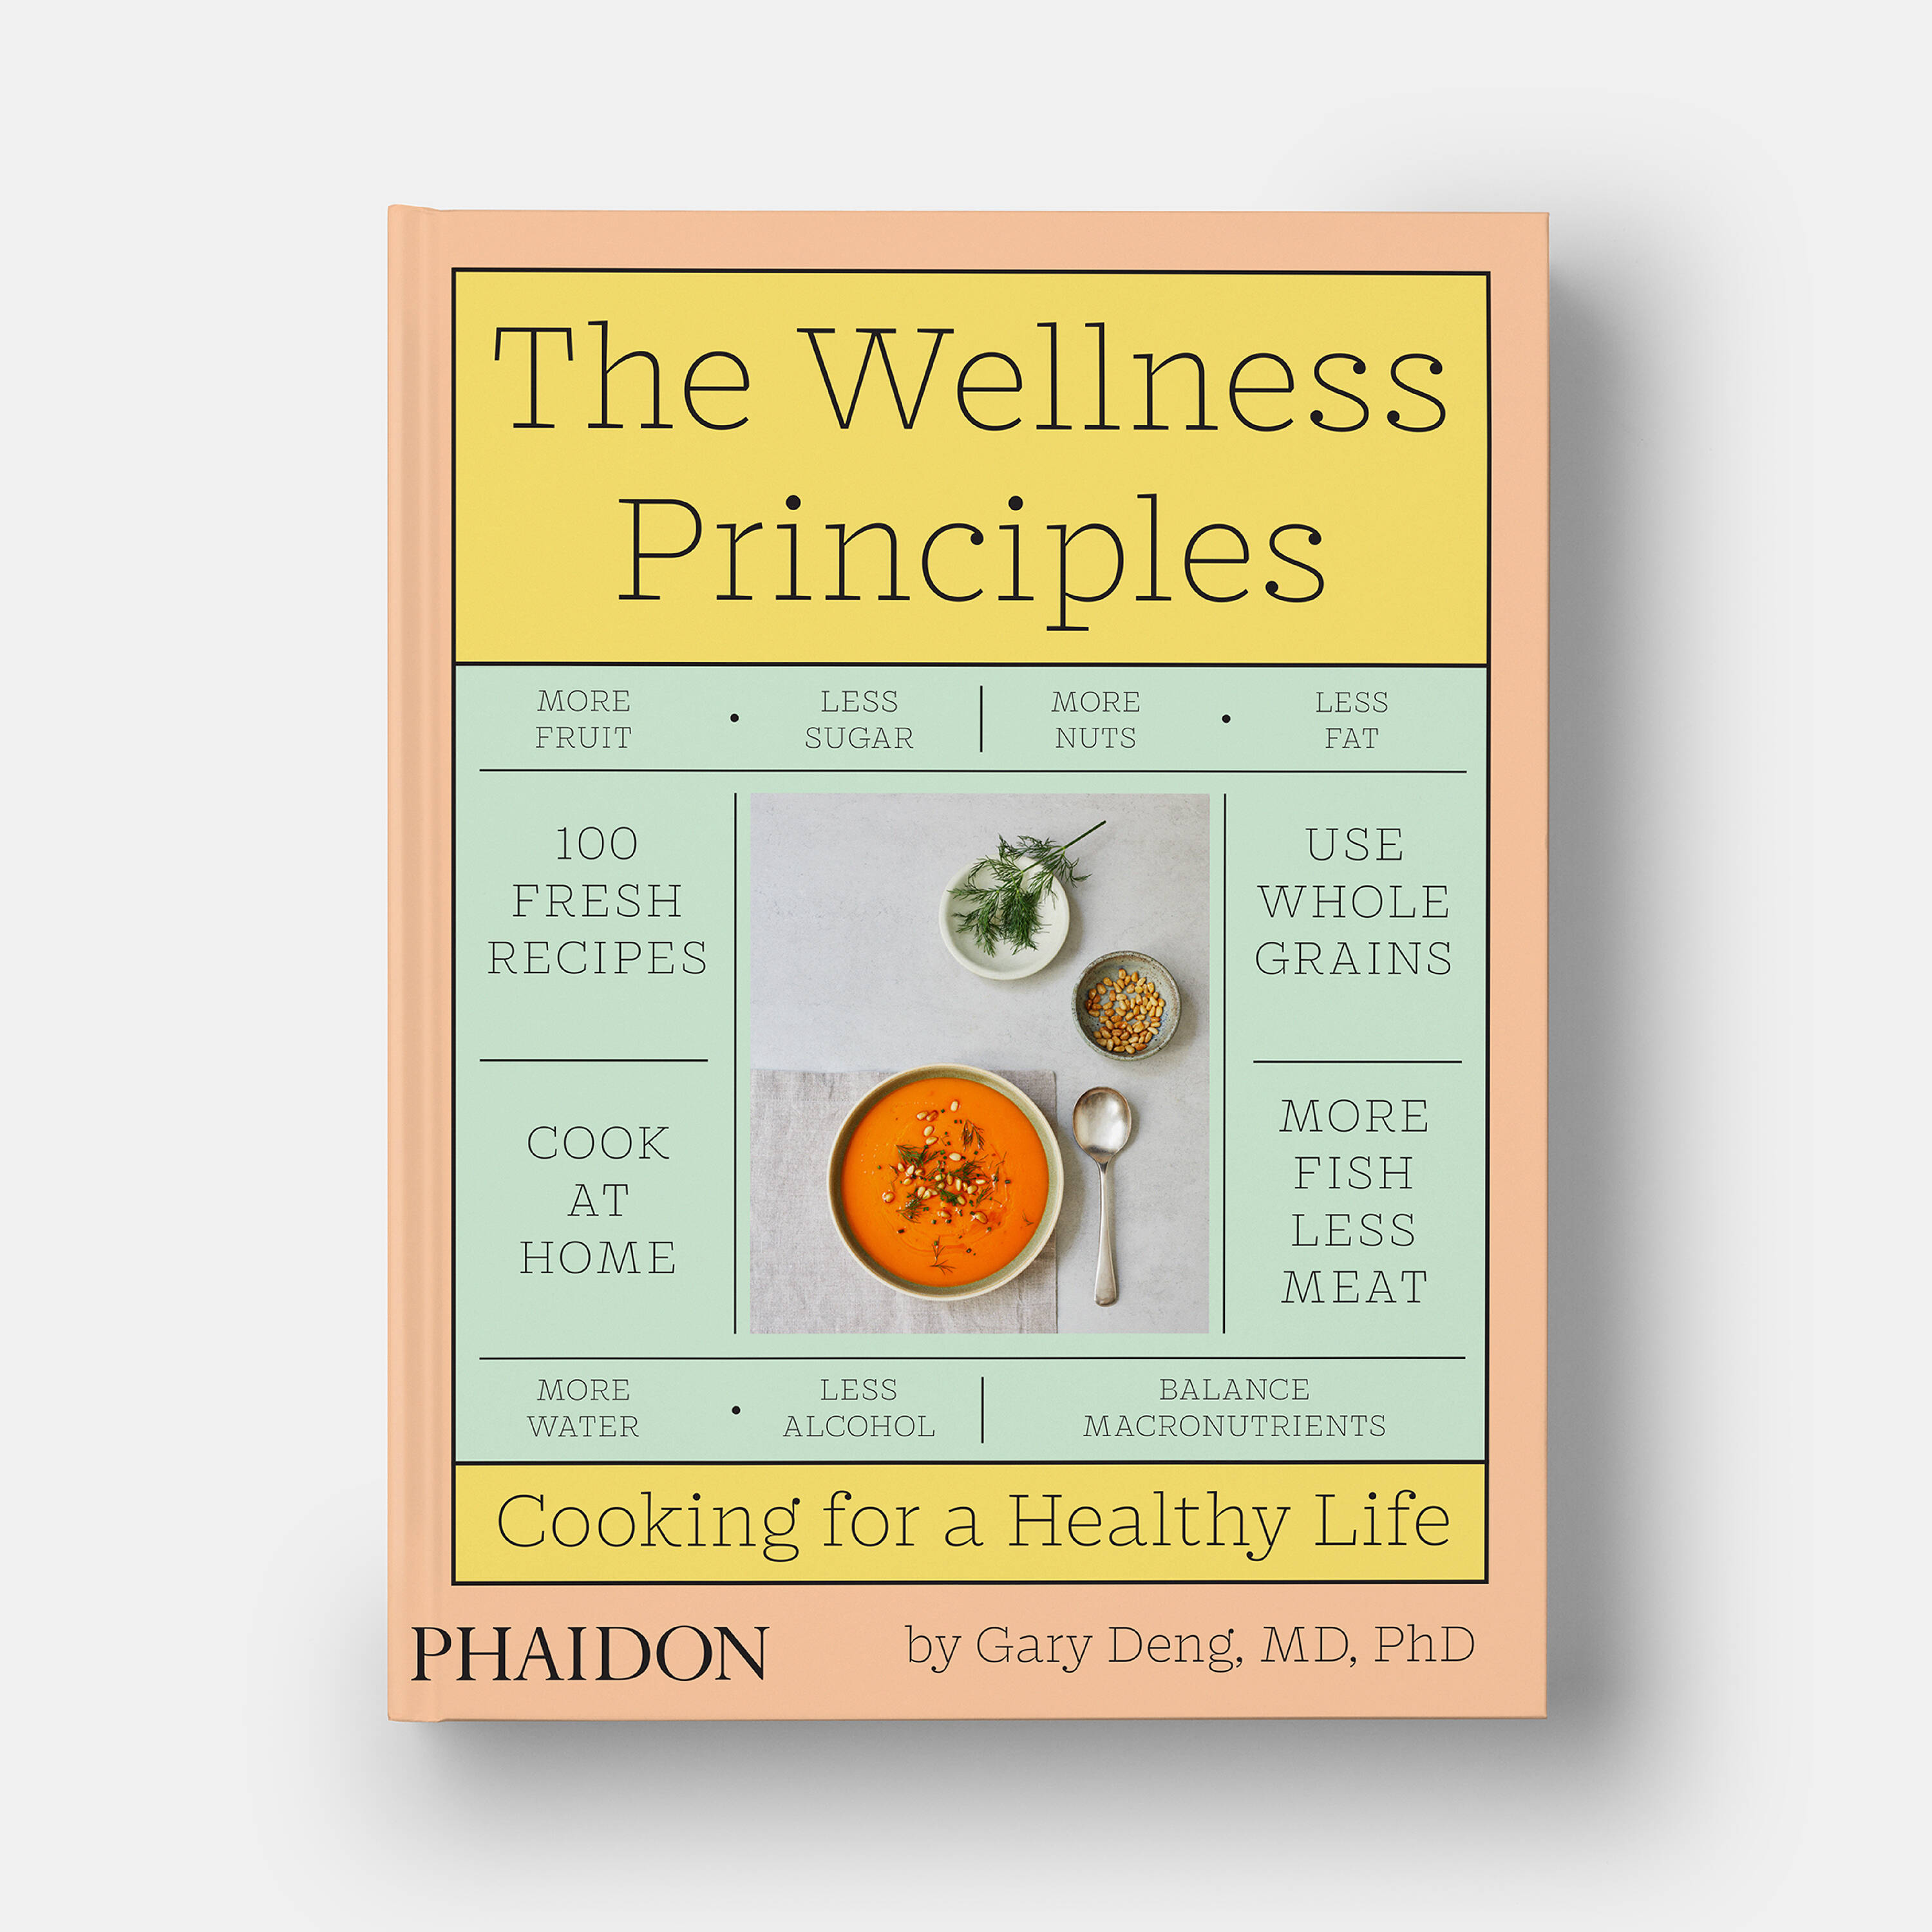 Try this Wellness Principle next time you fry